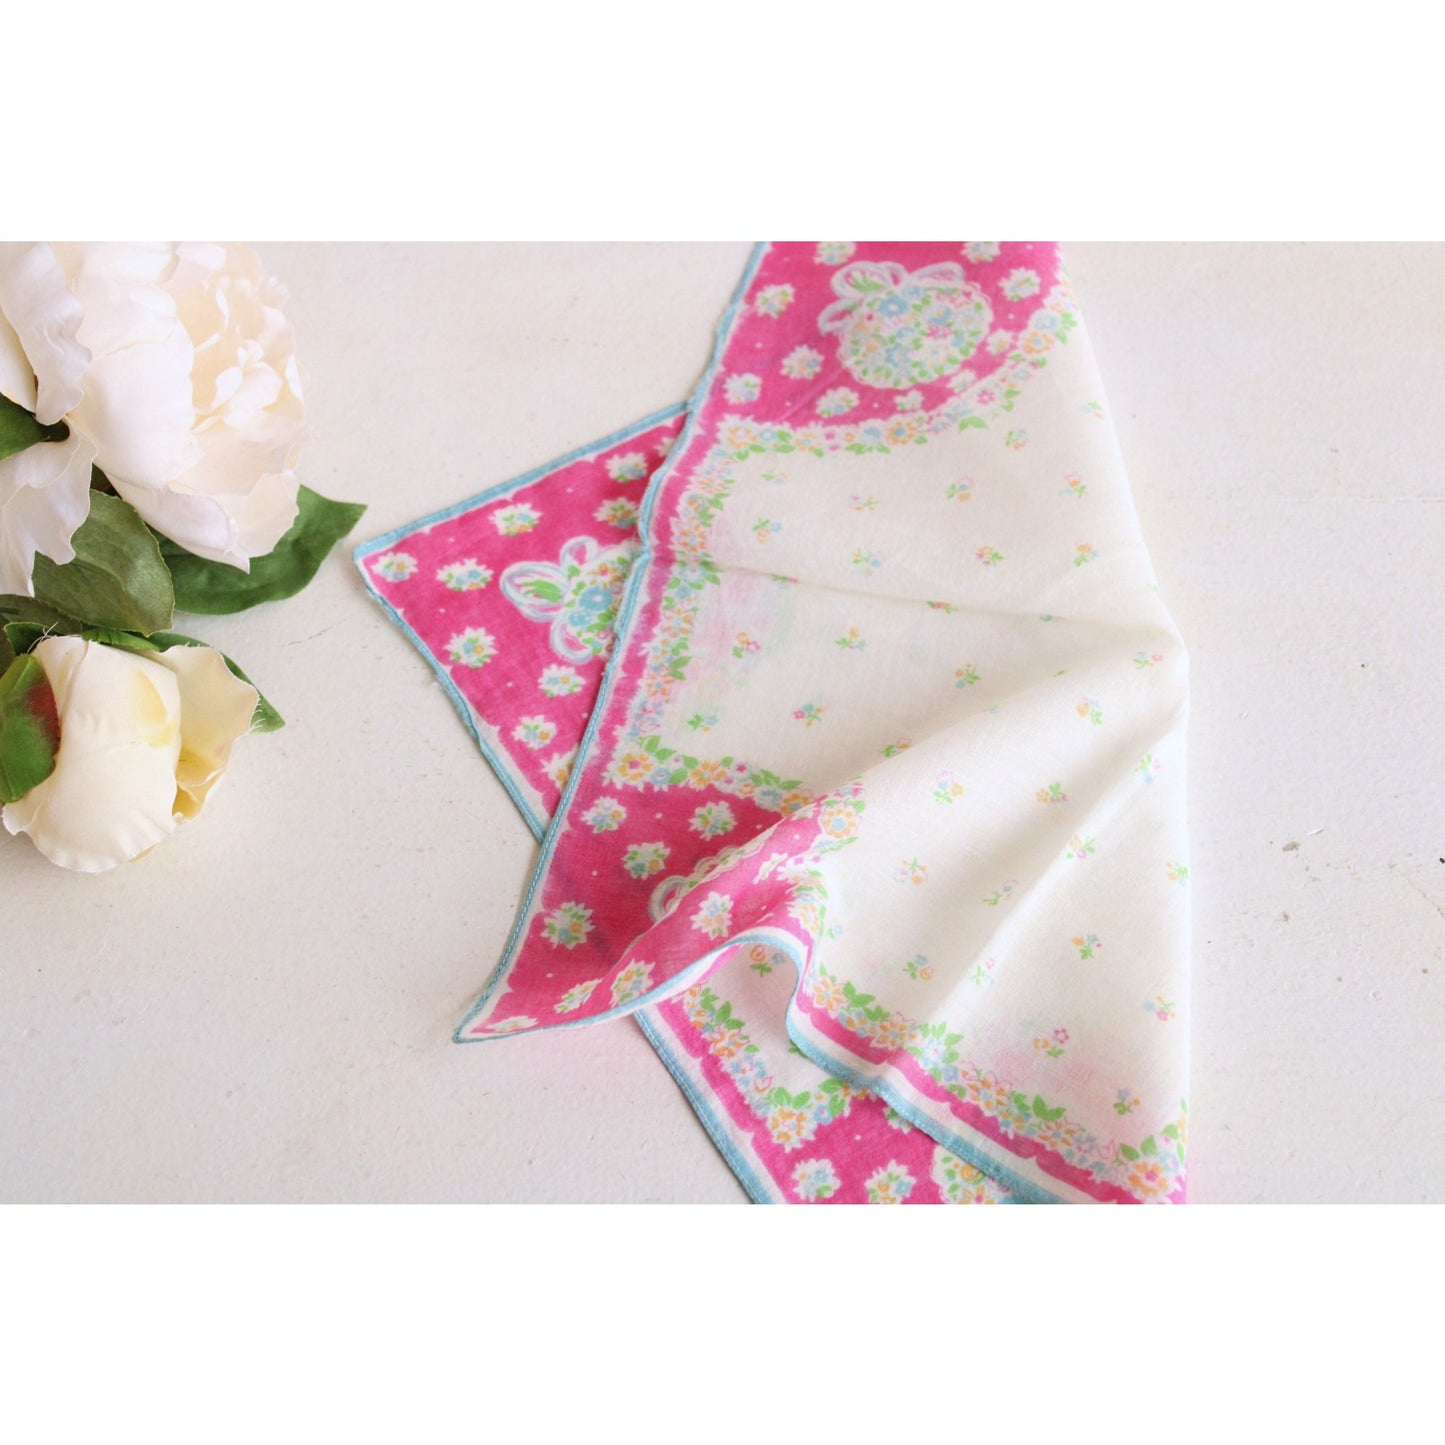 Vintage 1950s Pink Ribbons and Flowers Hanky